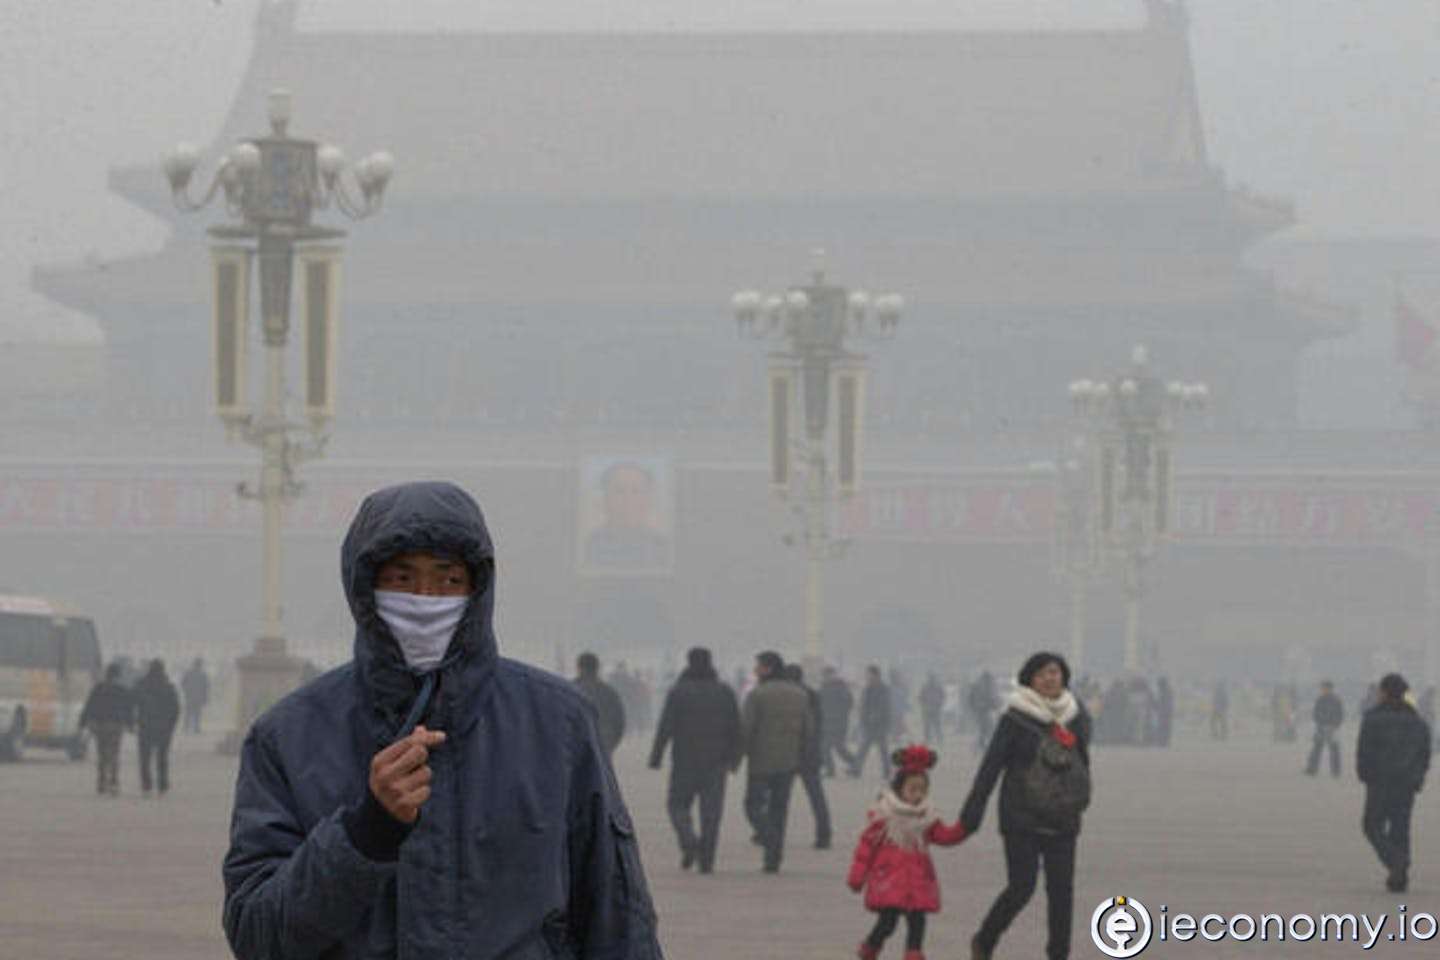 In 2019, China emitted more emissions than the OSCE countries combined